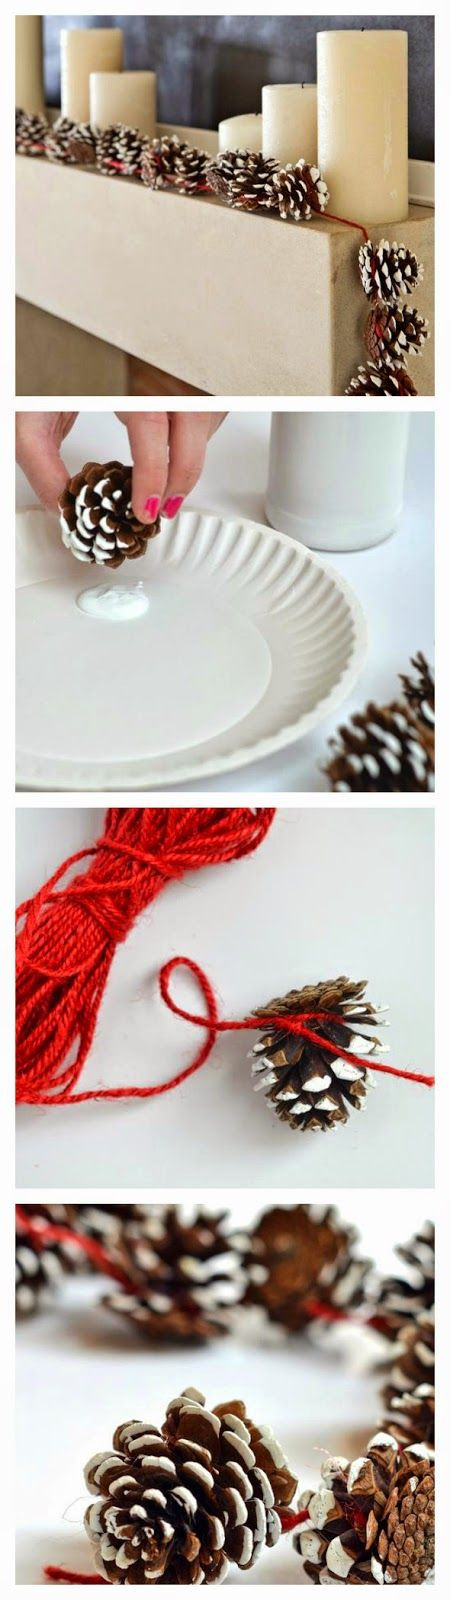 Hand made pine cone garlands - could make these wi...